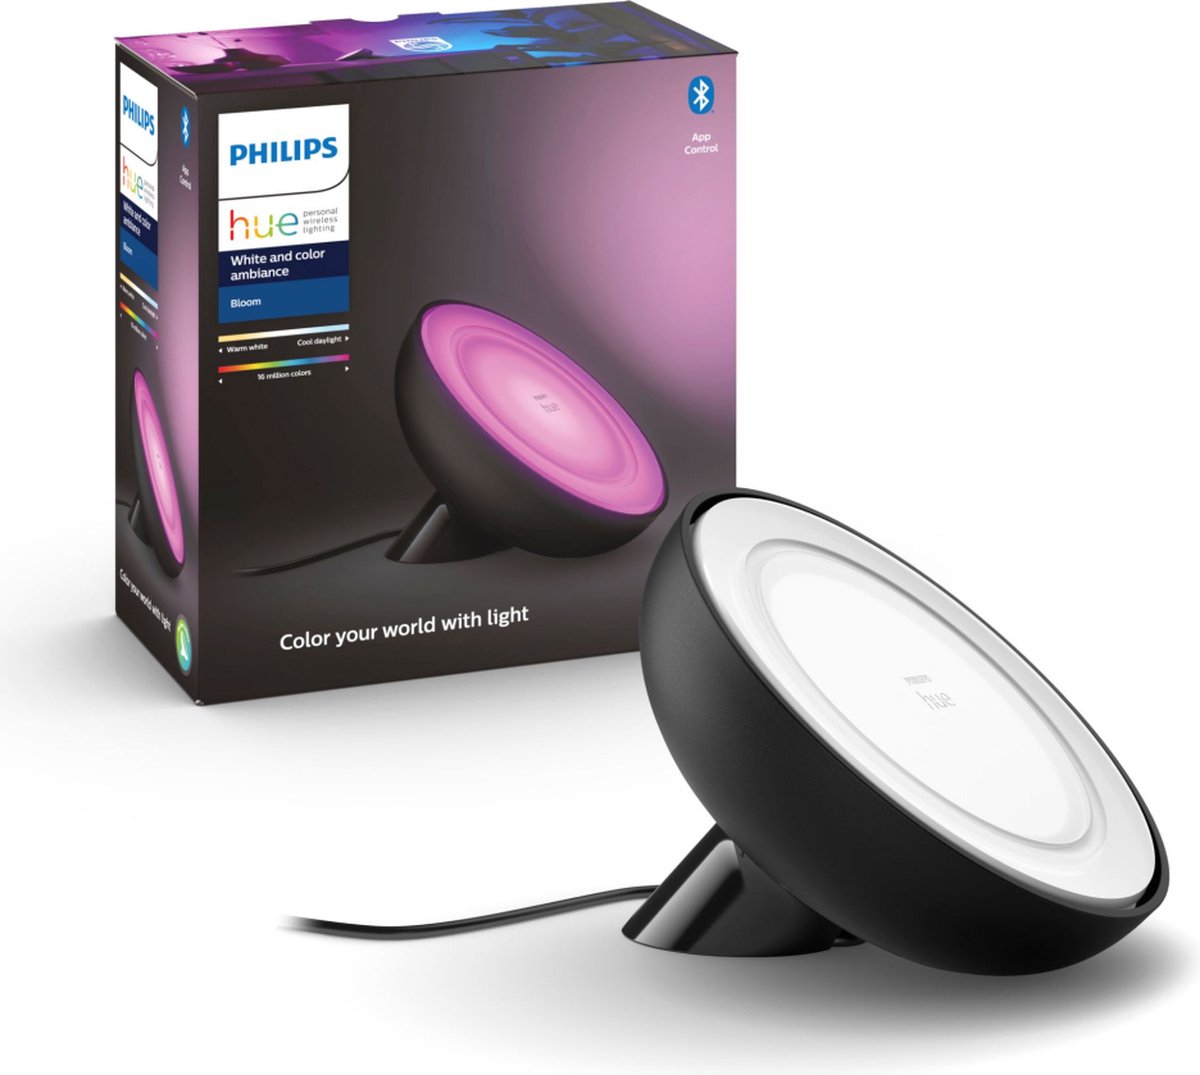 Philips Hue Bloom Tafellamp - White and Color Ambiance - Gëintegreerd LED - Zwart - 7,1W - Bluetooth - Philips Hue